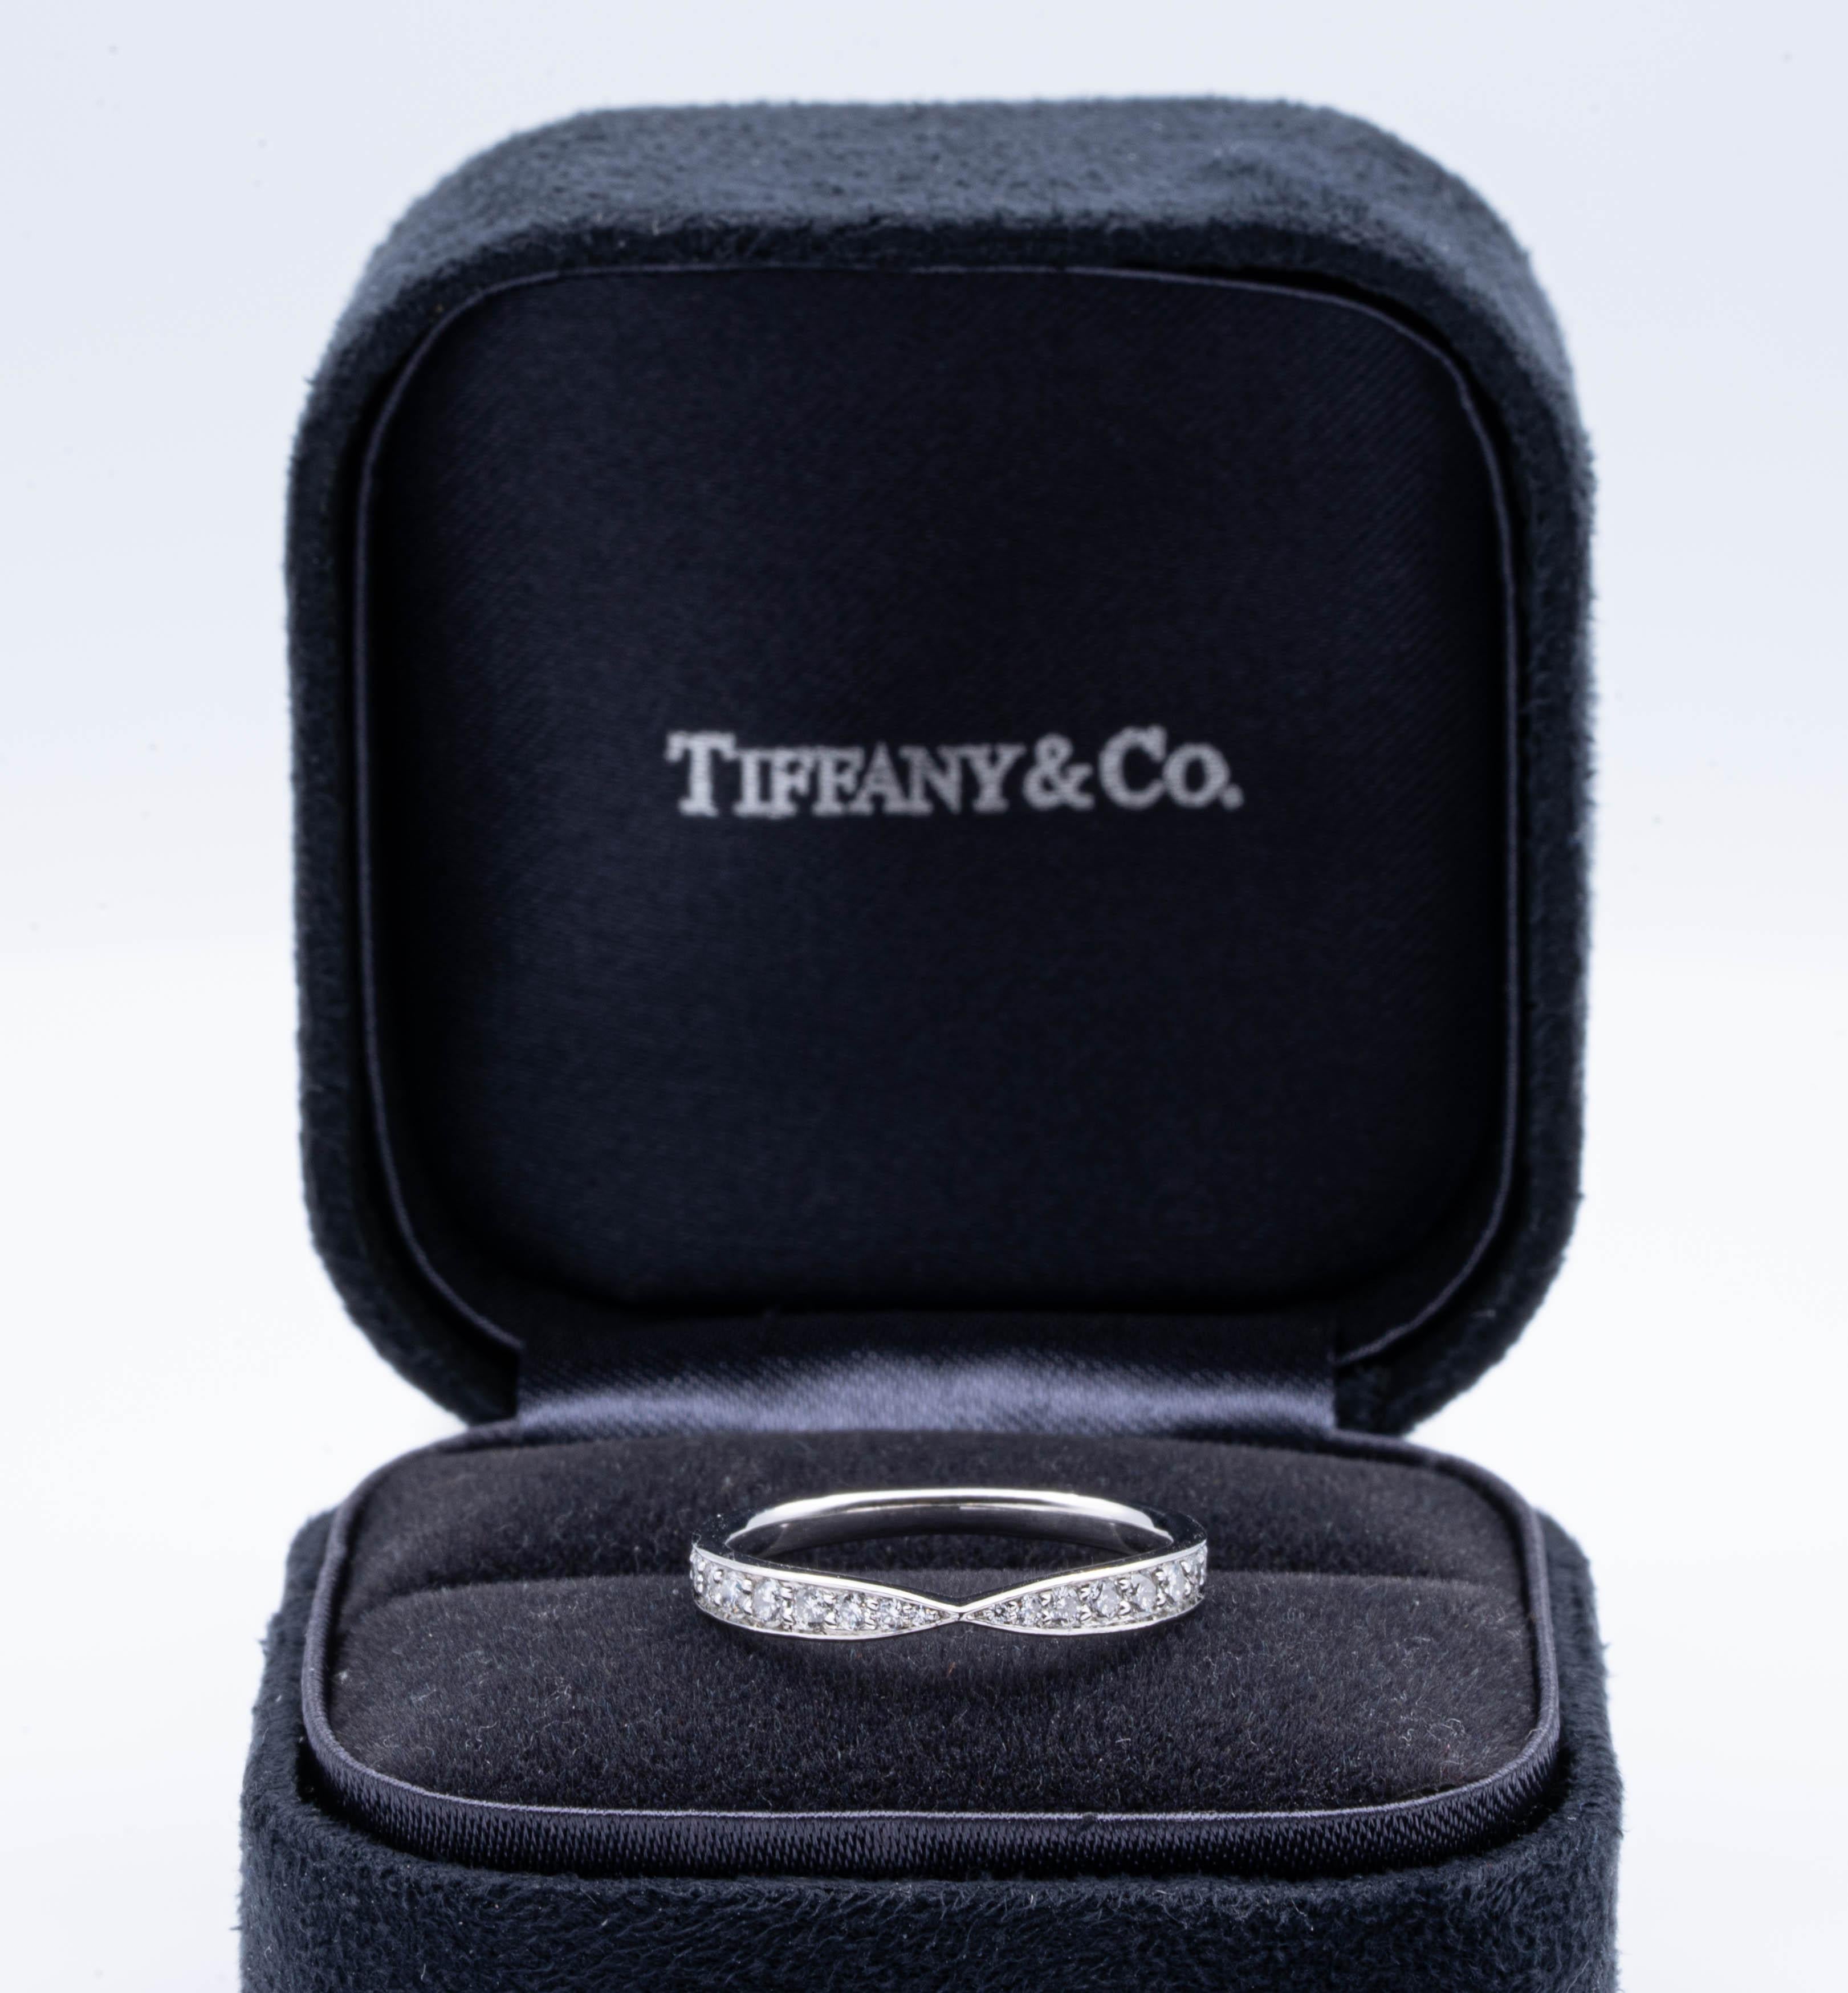 Tiffany & Co. Harmony band finely crafted in Platinum with graduated bead-set round brilliant cut diamonds weighing 0.23 cts total weight.


Stamp: Tiffany & Co. PT950
Size: 6
Weight: 2.7 grams

Includes Original Tiffany Box.

*Expertly cleaned and